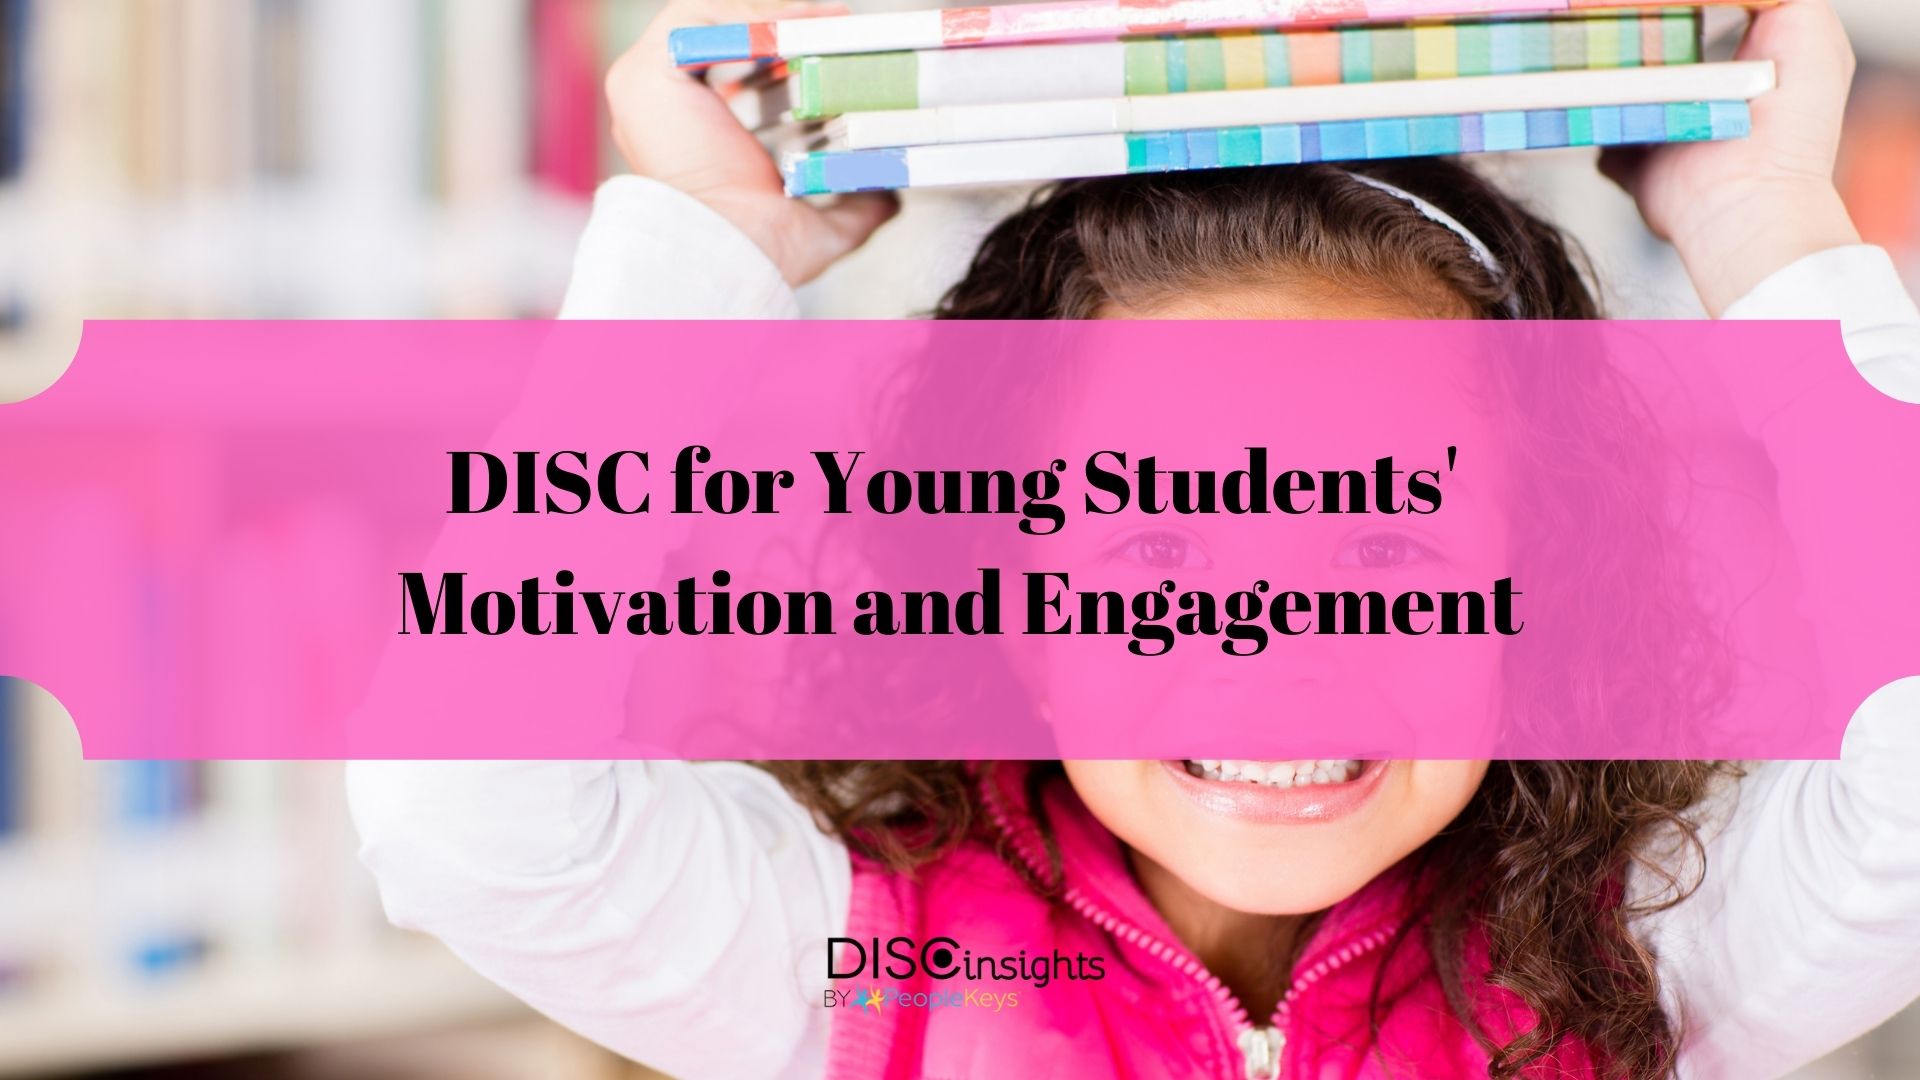 DISC for young students' motivation and engagement